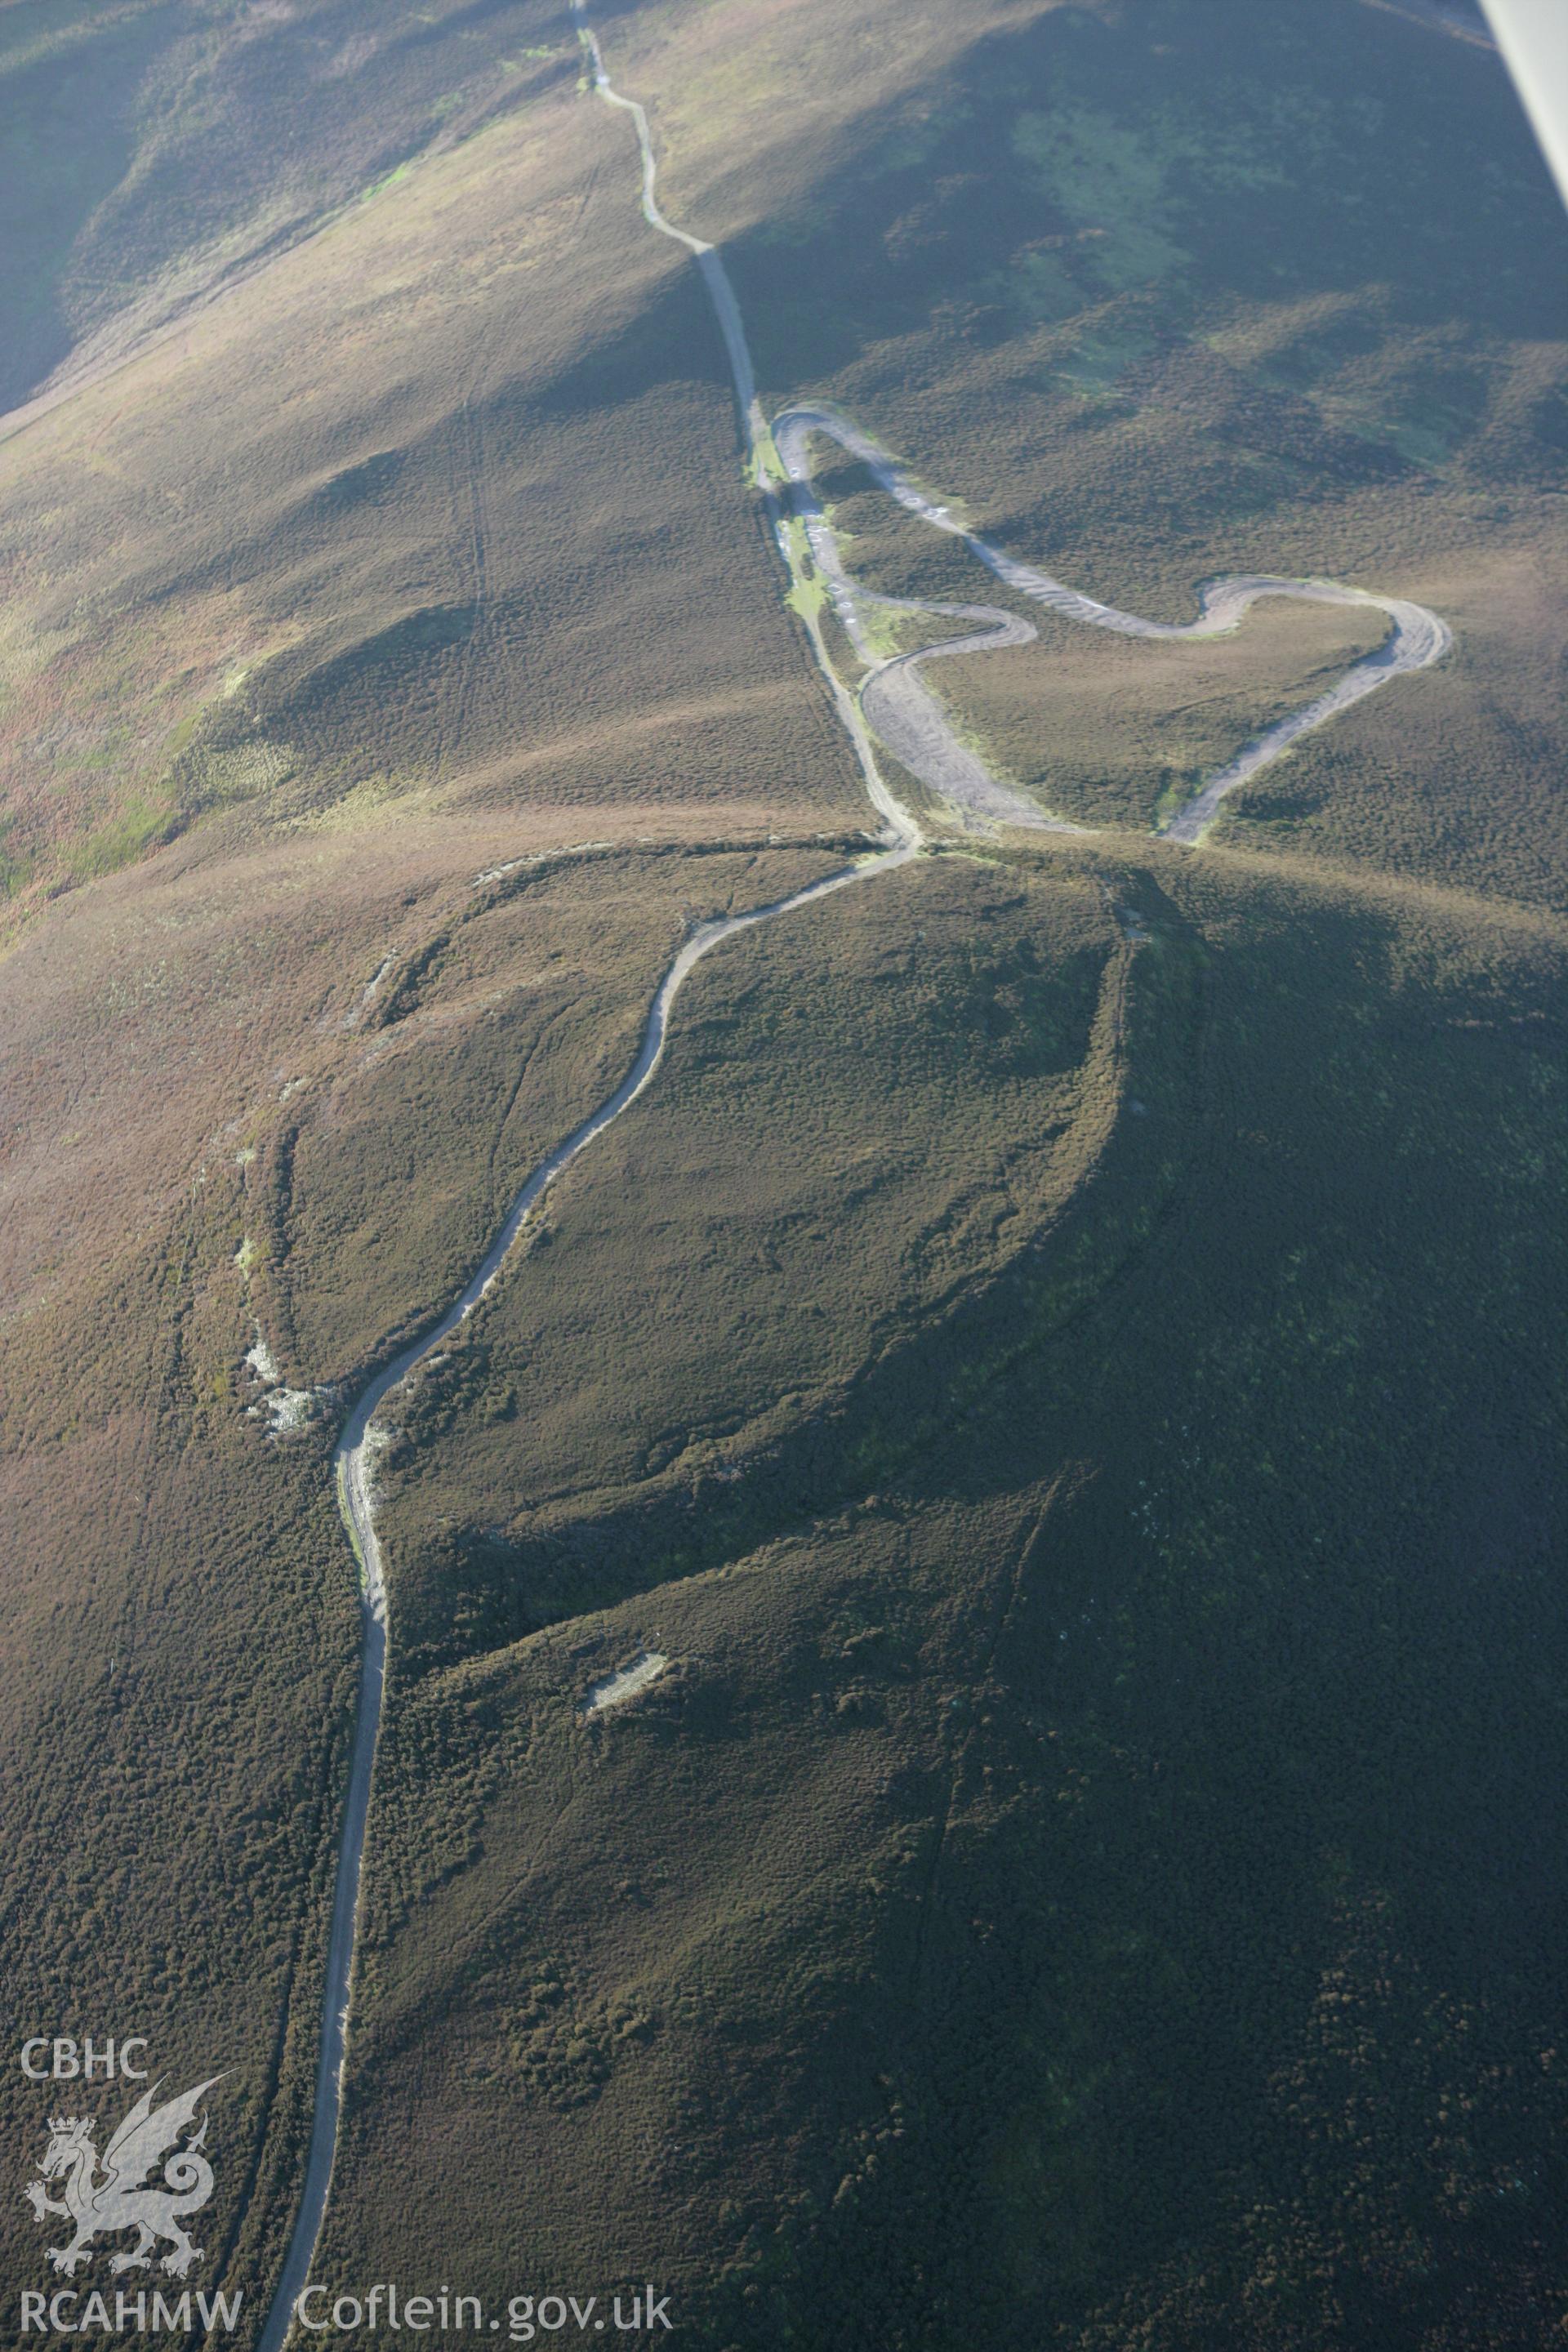 RCAHMW colour oblique photograph of Moel y Gaer hillfort. Taken by Toby Driver on 11/12/2007.